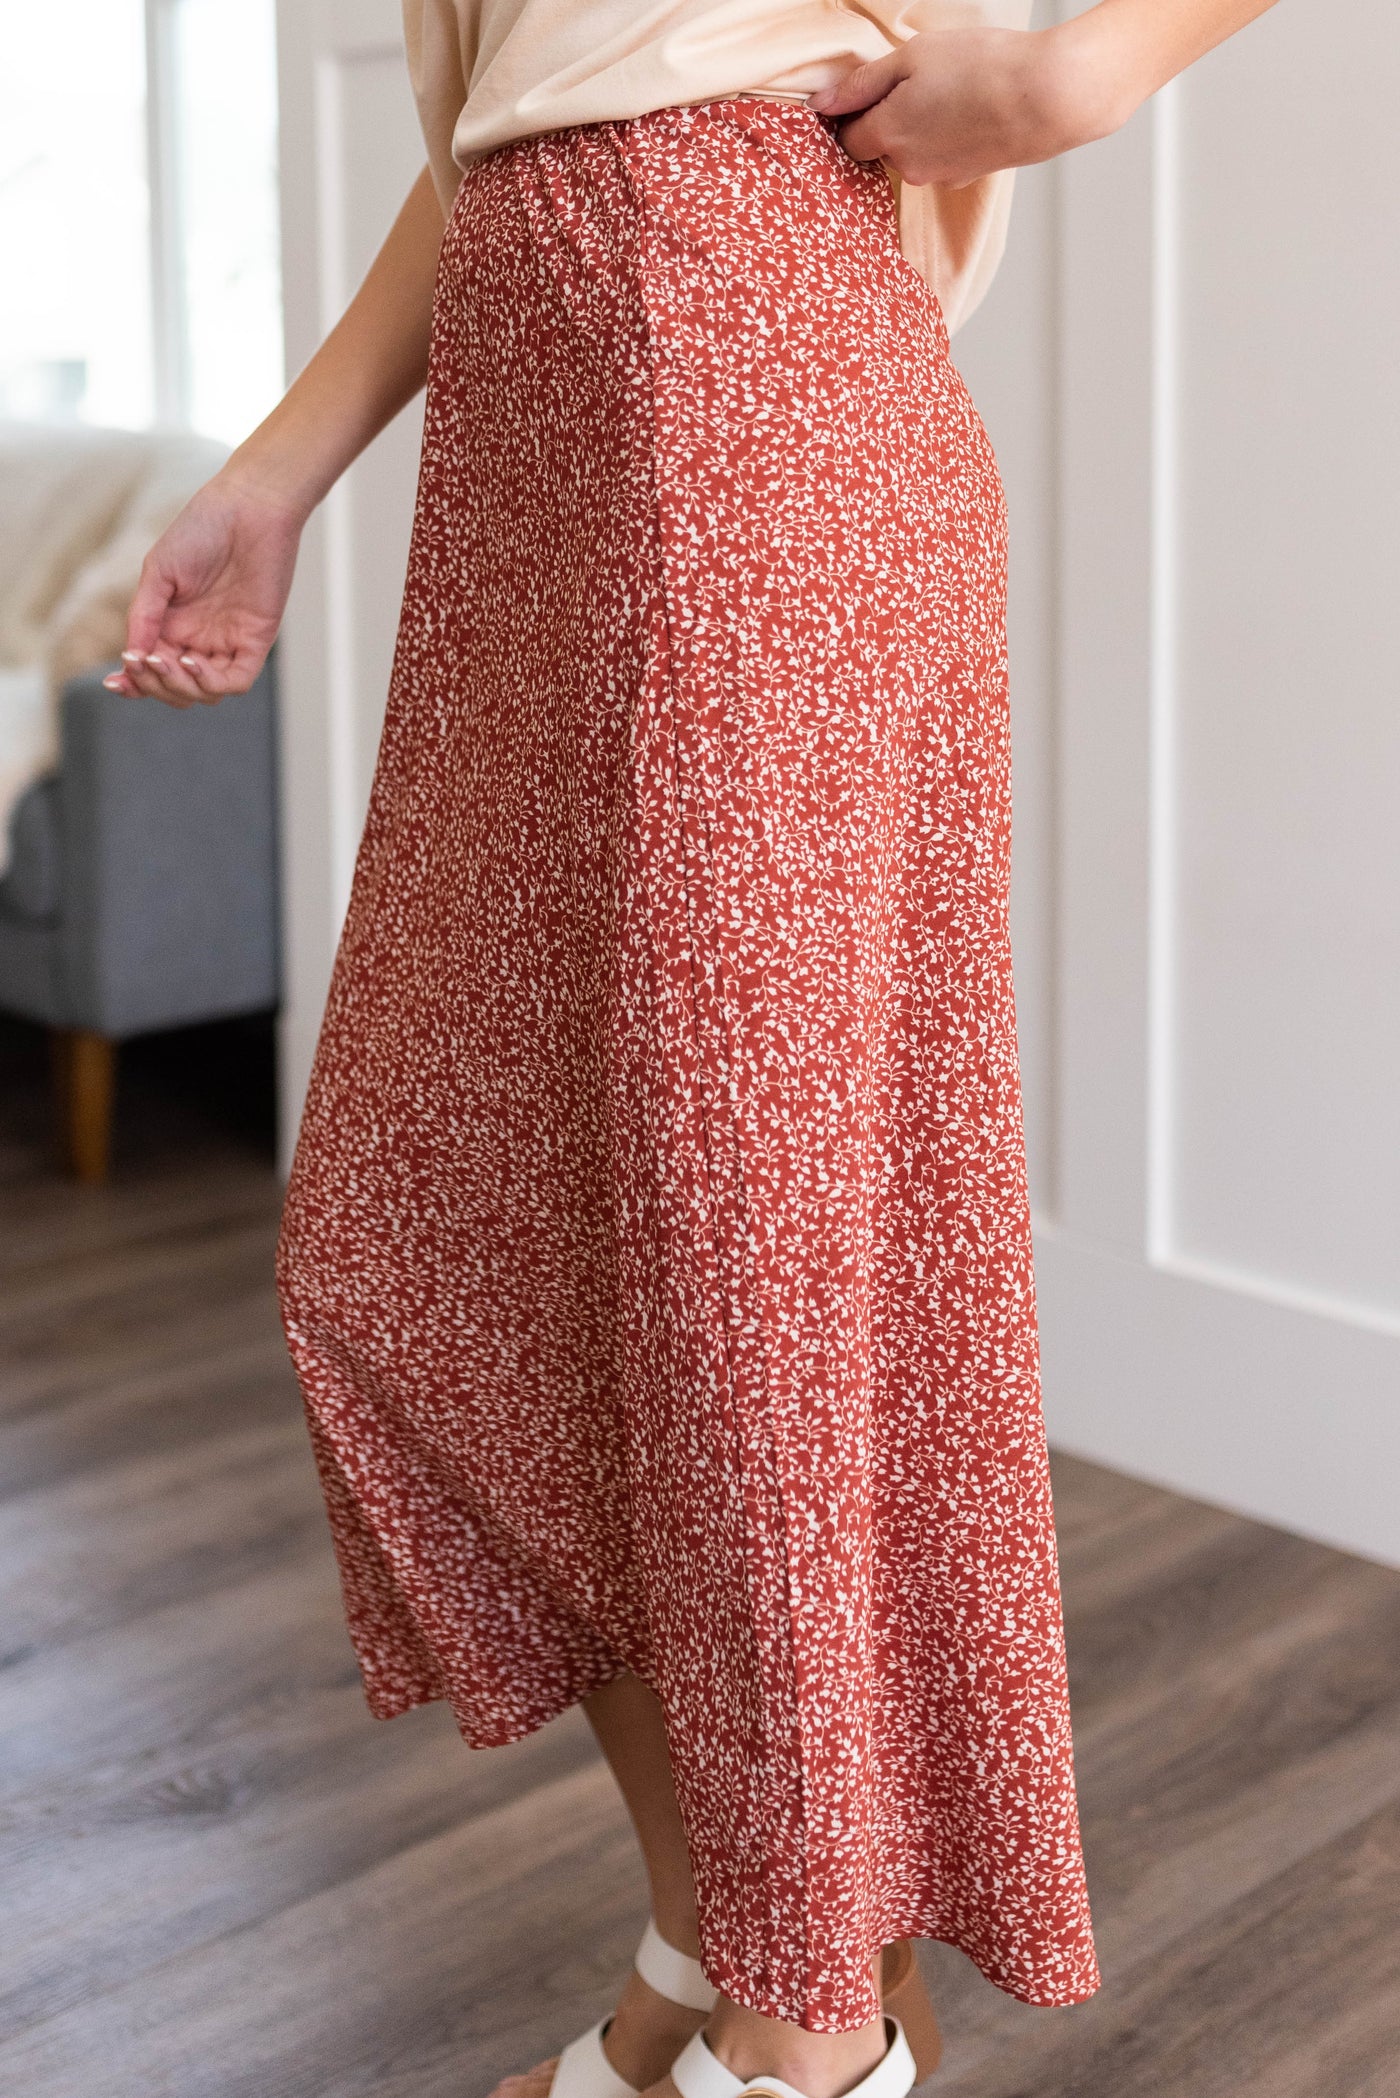 Side view of the terracotta red floral skirt